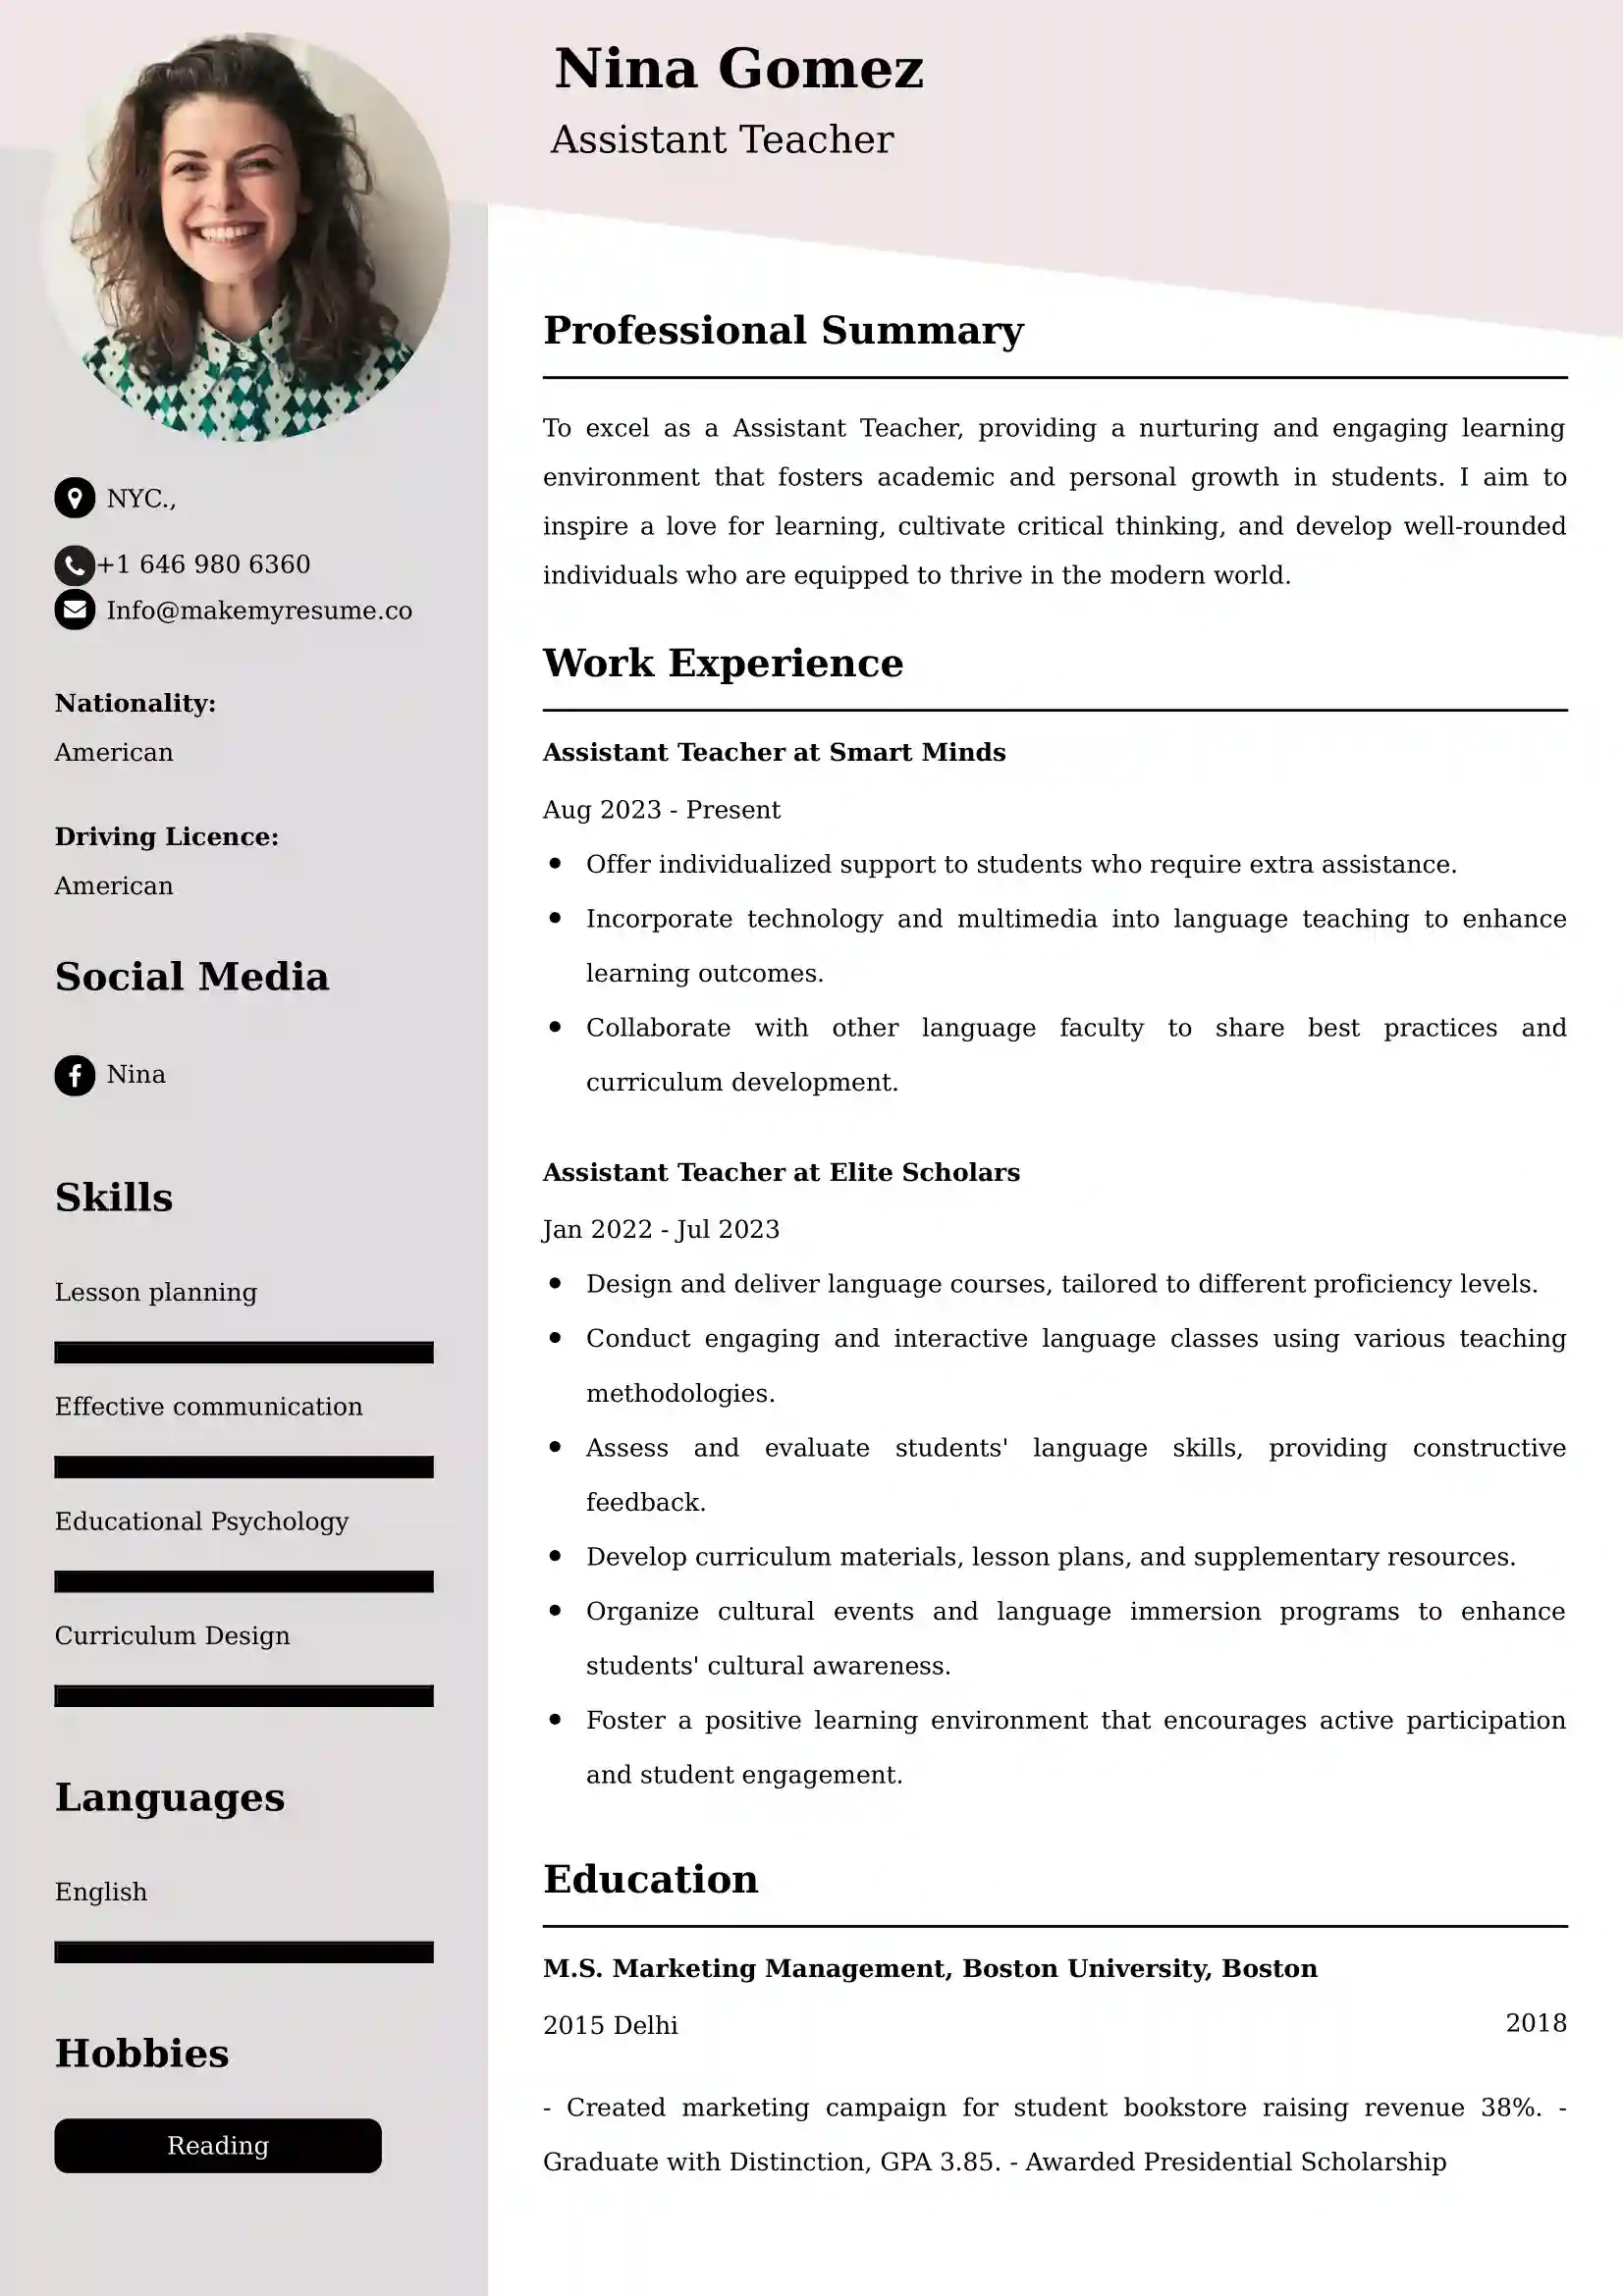 Get Prime Teaching Resume Examples and Advice